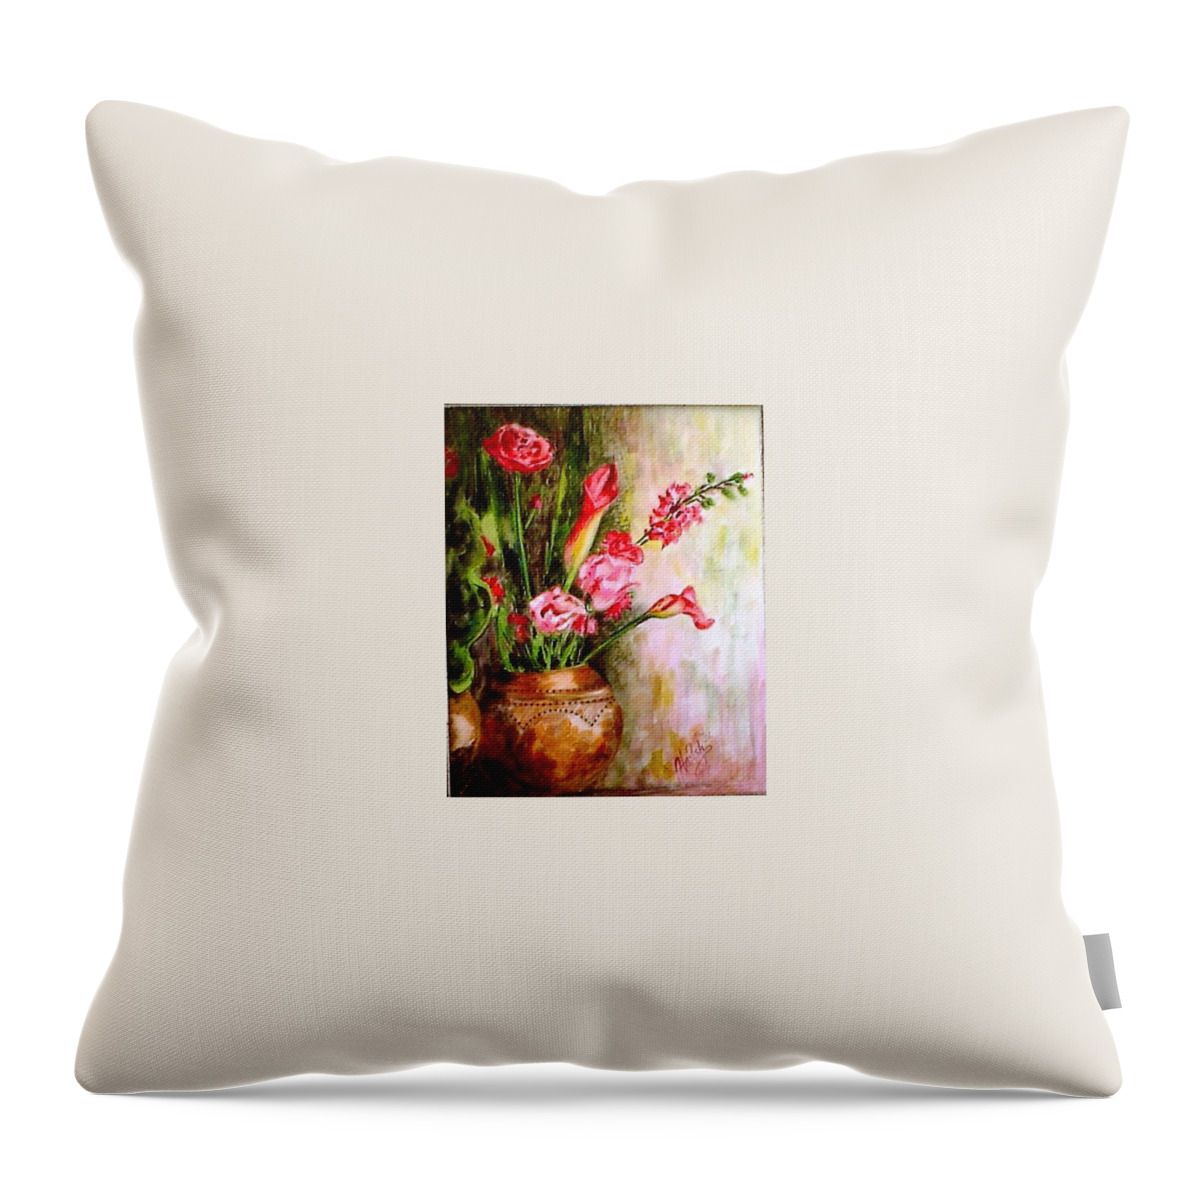 Pots Throw Pillow featuring the painting Lilies in the Pots by Harsh Malik